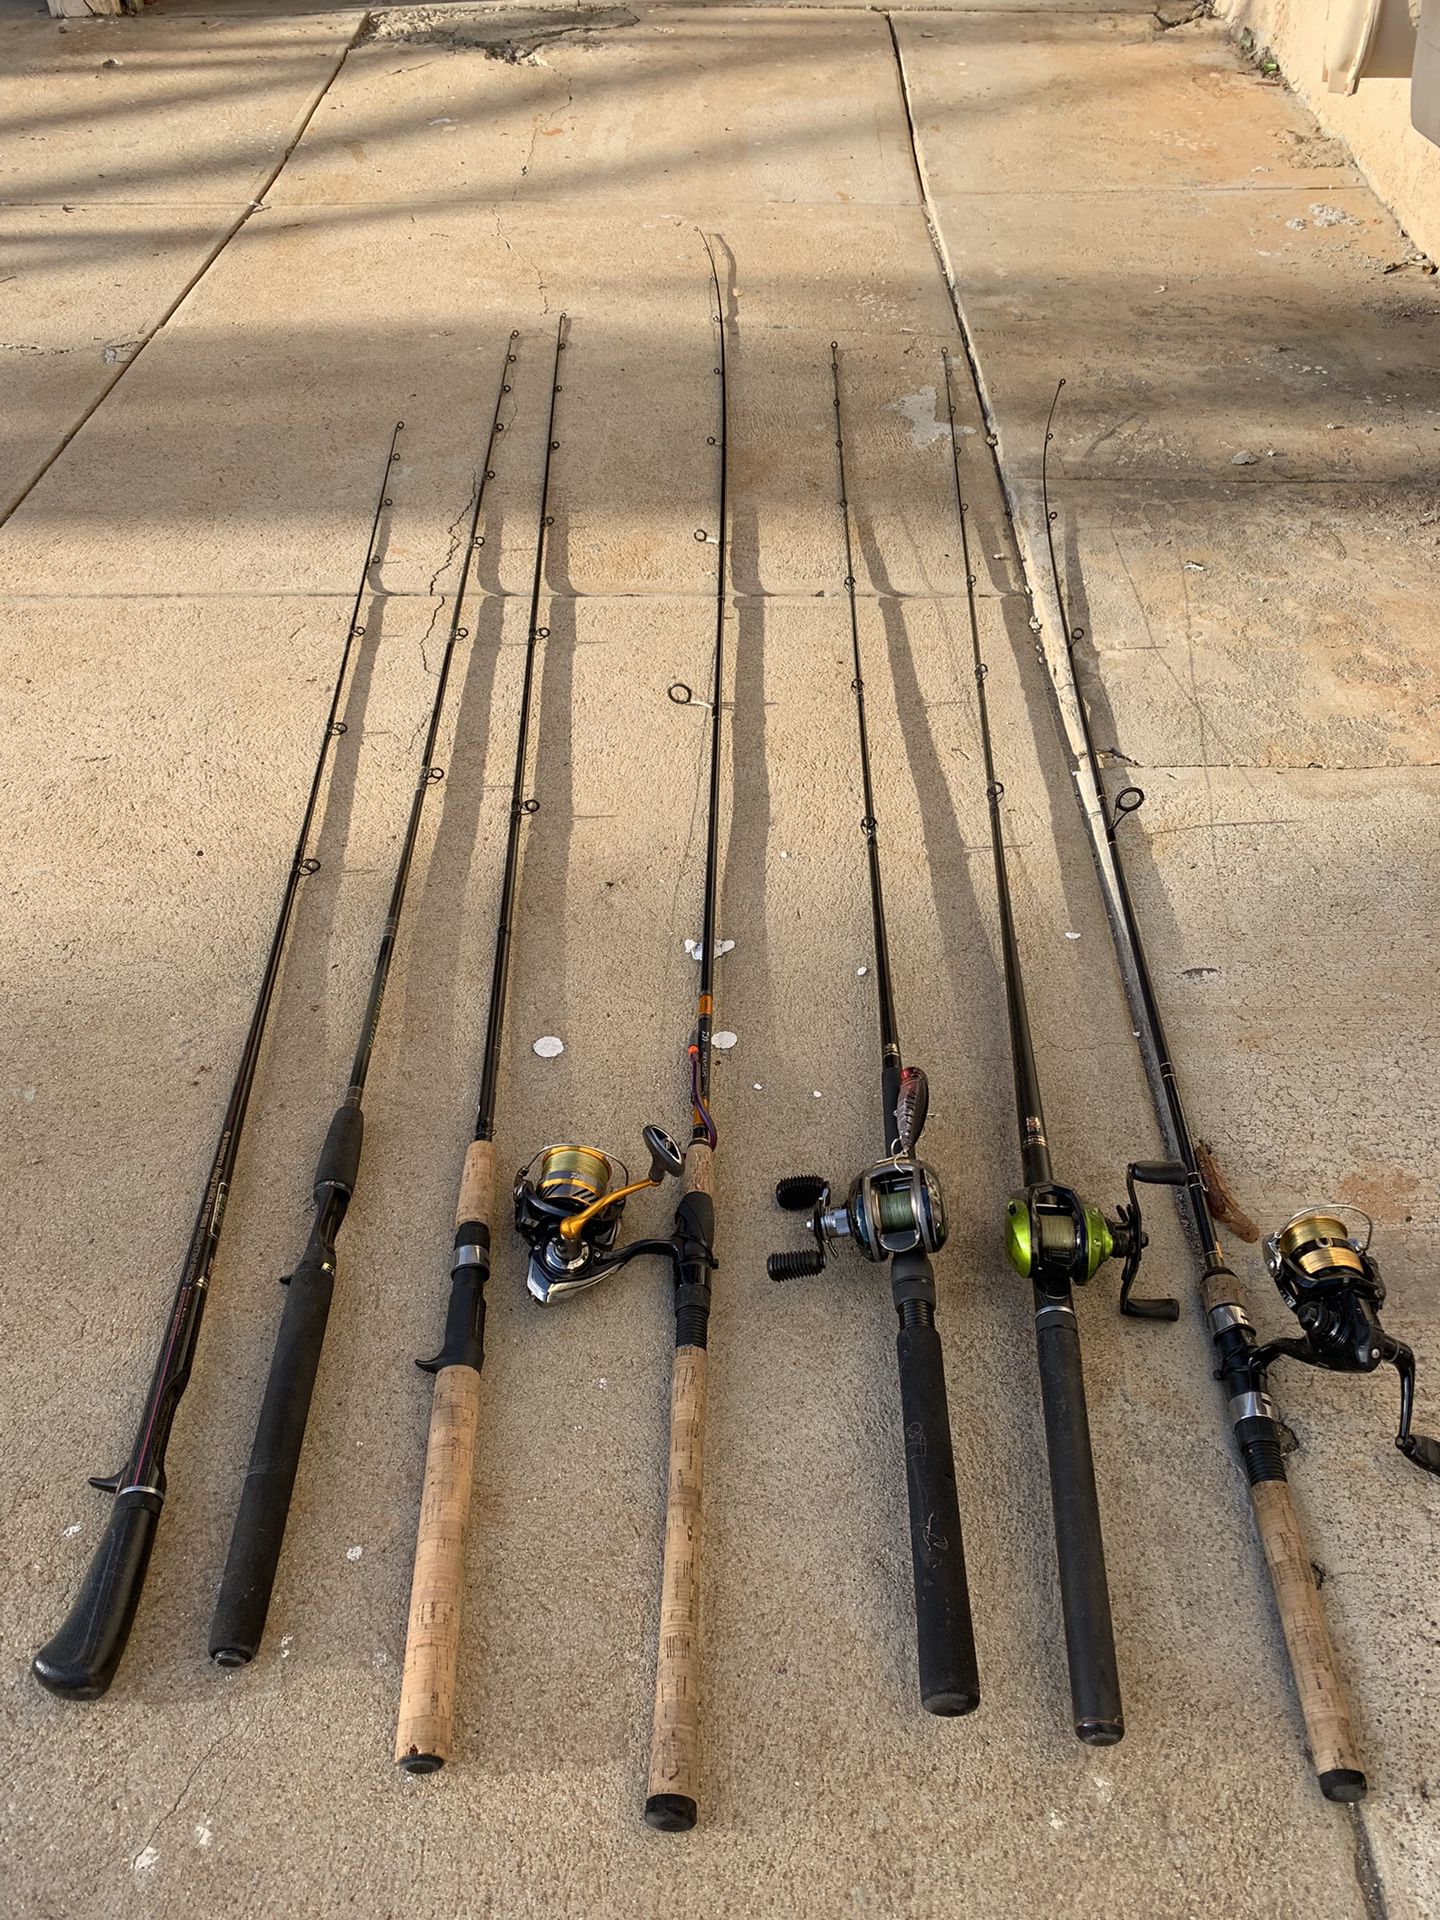 Fishing Rods for Sale in San Diego, CA - OfferUp